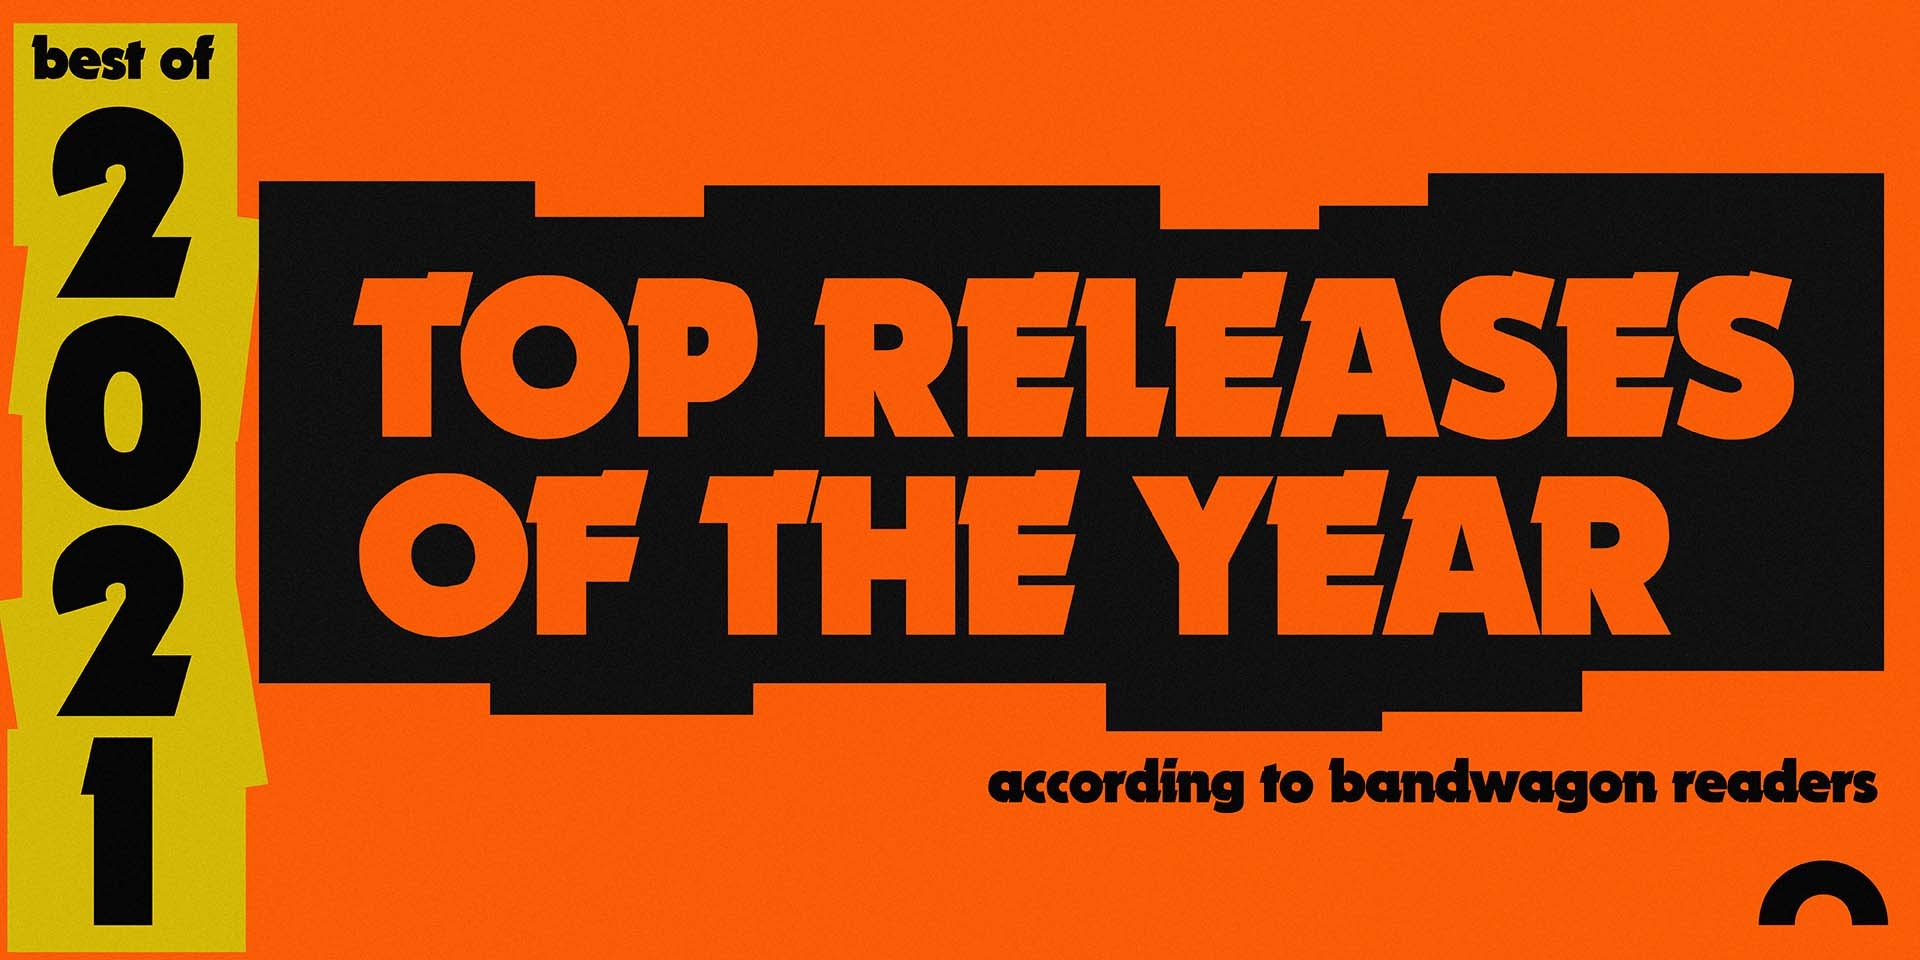 Cast your votes for the Best of 2021: Top Releases of the Year According to Bandwagon Readers lists